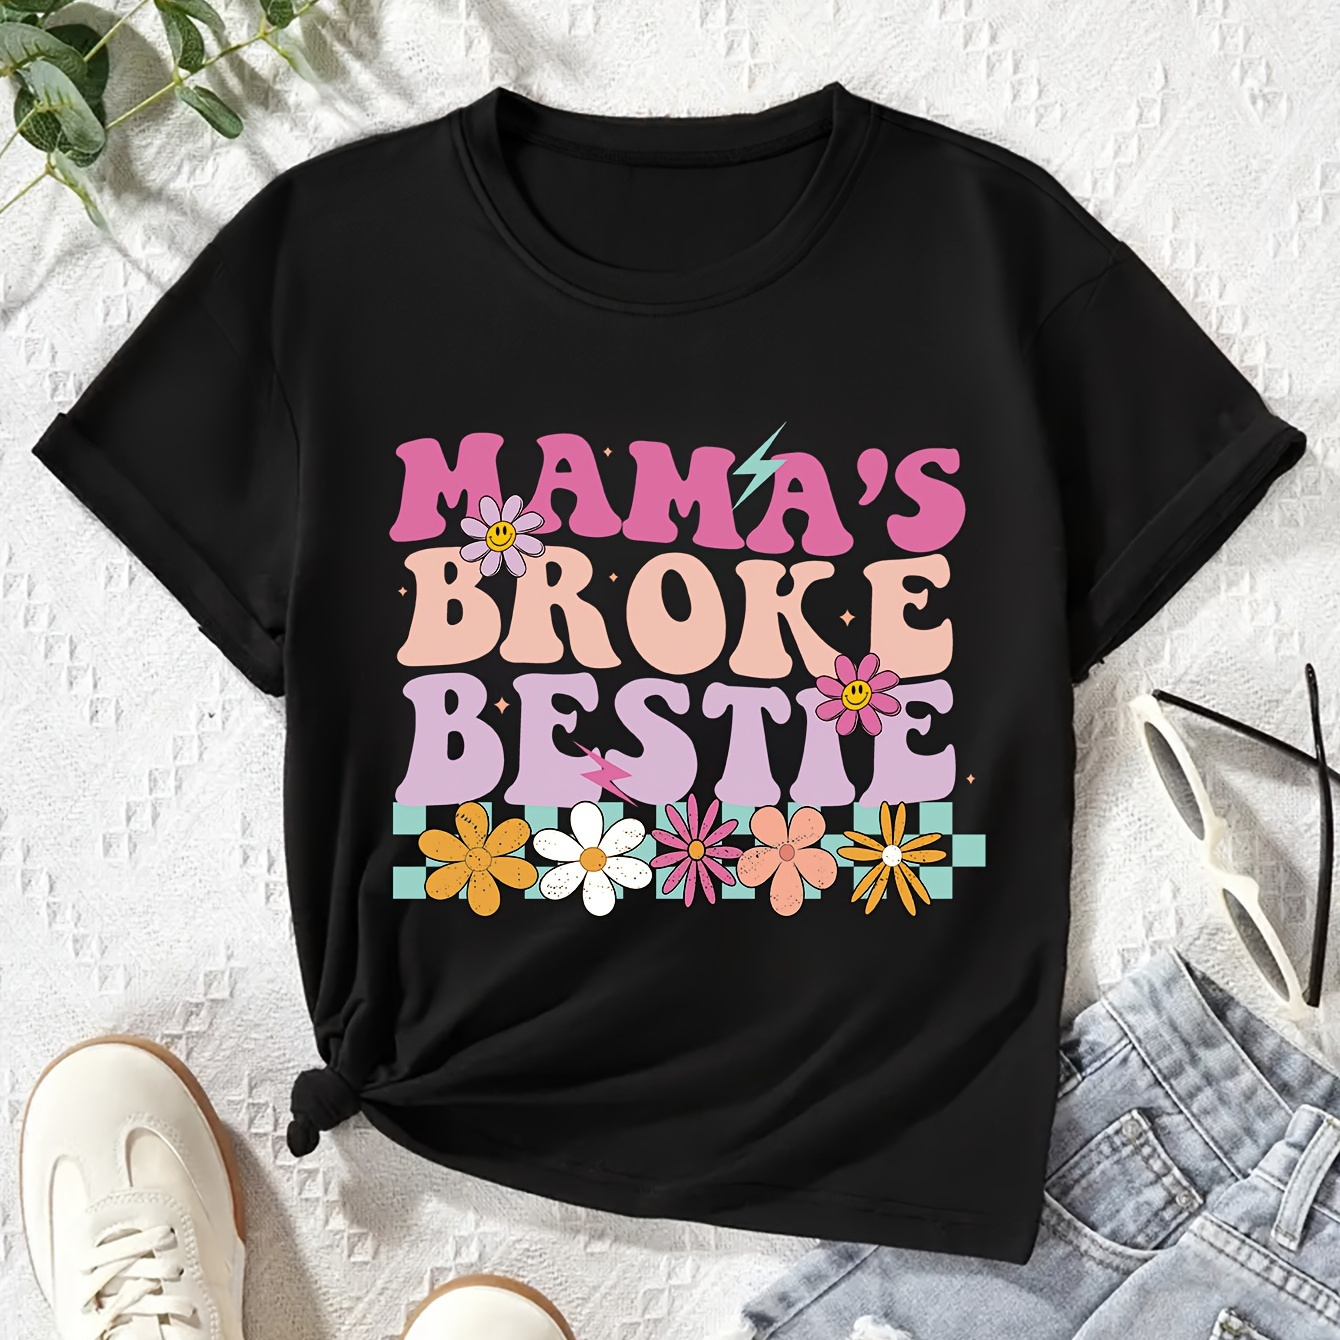 

Mama's Broke Bestie With Flowers Graphic Print, Girls' Casual Crew Neck Short Sleeve T-shirt, Comfy Top Clothes For Spring And Summer For Outdoor Activities